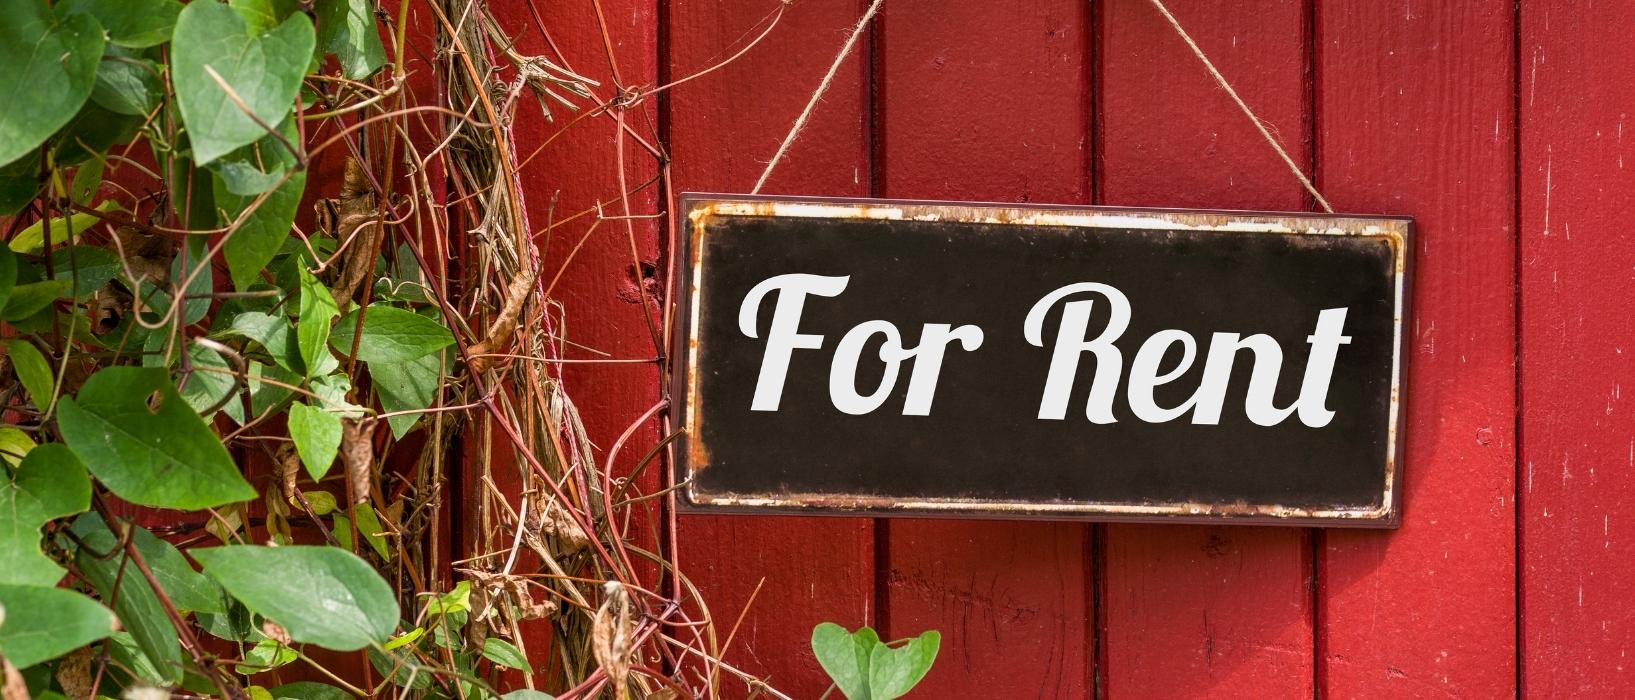 for rent sign hanging on red wooden wall with vines hanging on the side